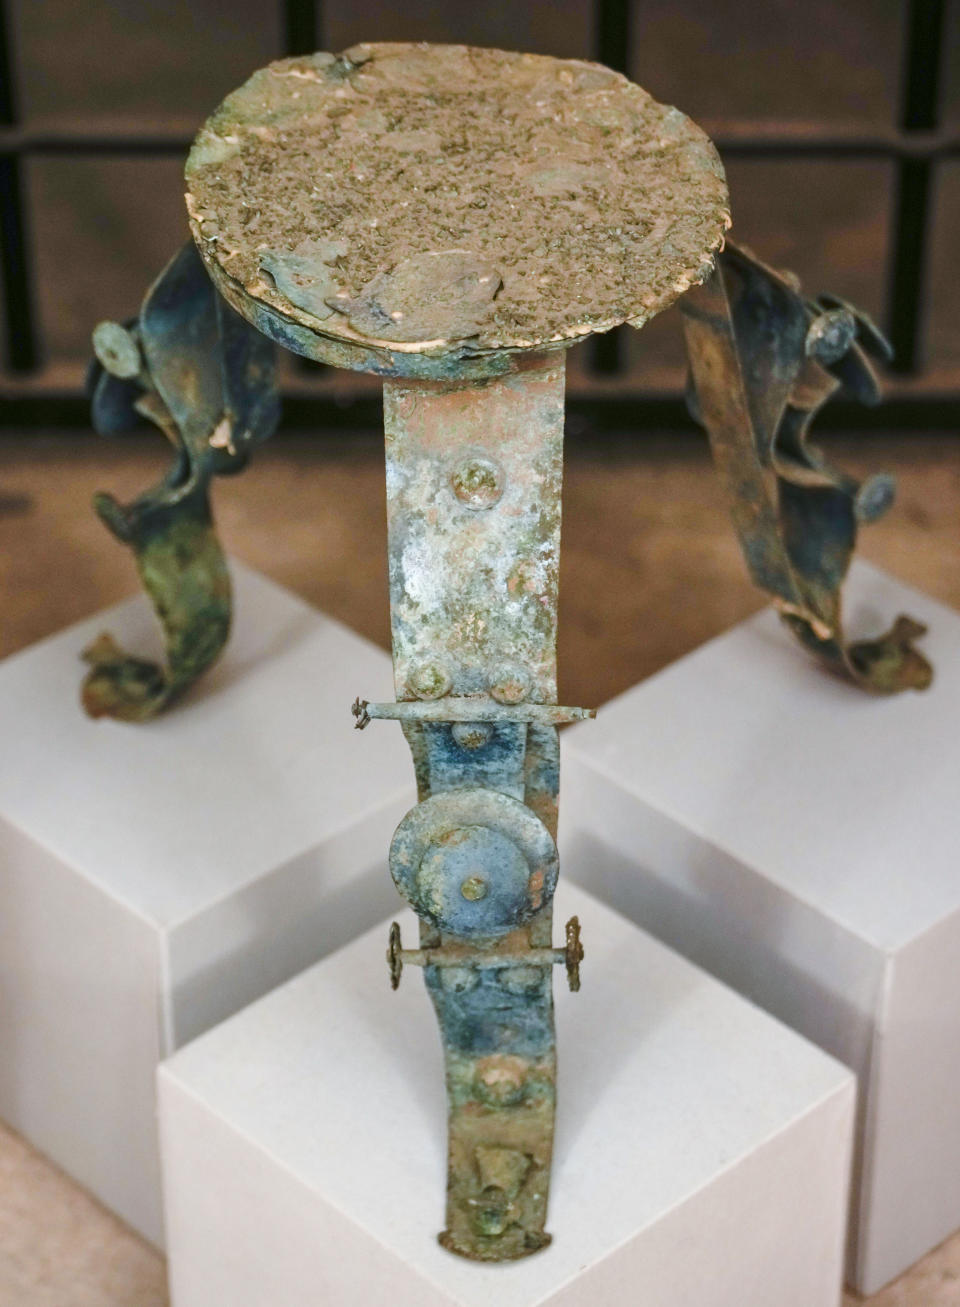 A rare and well-preserved tripod table in foil bronze, Etruscan production of the 7th century. B.C., most probably coming from an aristocratic sepulture and part of the 750 archaeological finds from clandestine excavations on Italian territory on display during a press conference in Rome, Wednesday, May 31, 2023. The set of artifacts, which can be dated overall between the eighth century BC. and the medieval period, and whose value is estimated at 12 million euros, was in possession of an English company in liquidation, Symes Ltd, attributable to Robin Symes, an important trafficker of cultural assets, and was repatriated from London on 19 May. (AP Photo/Domenico Stinellis)